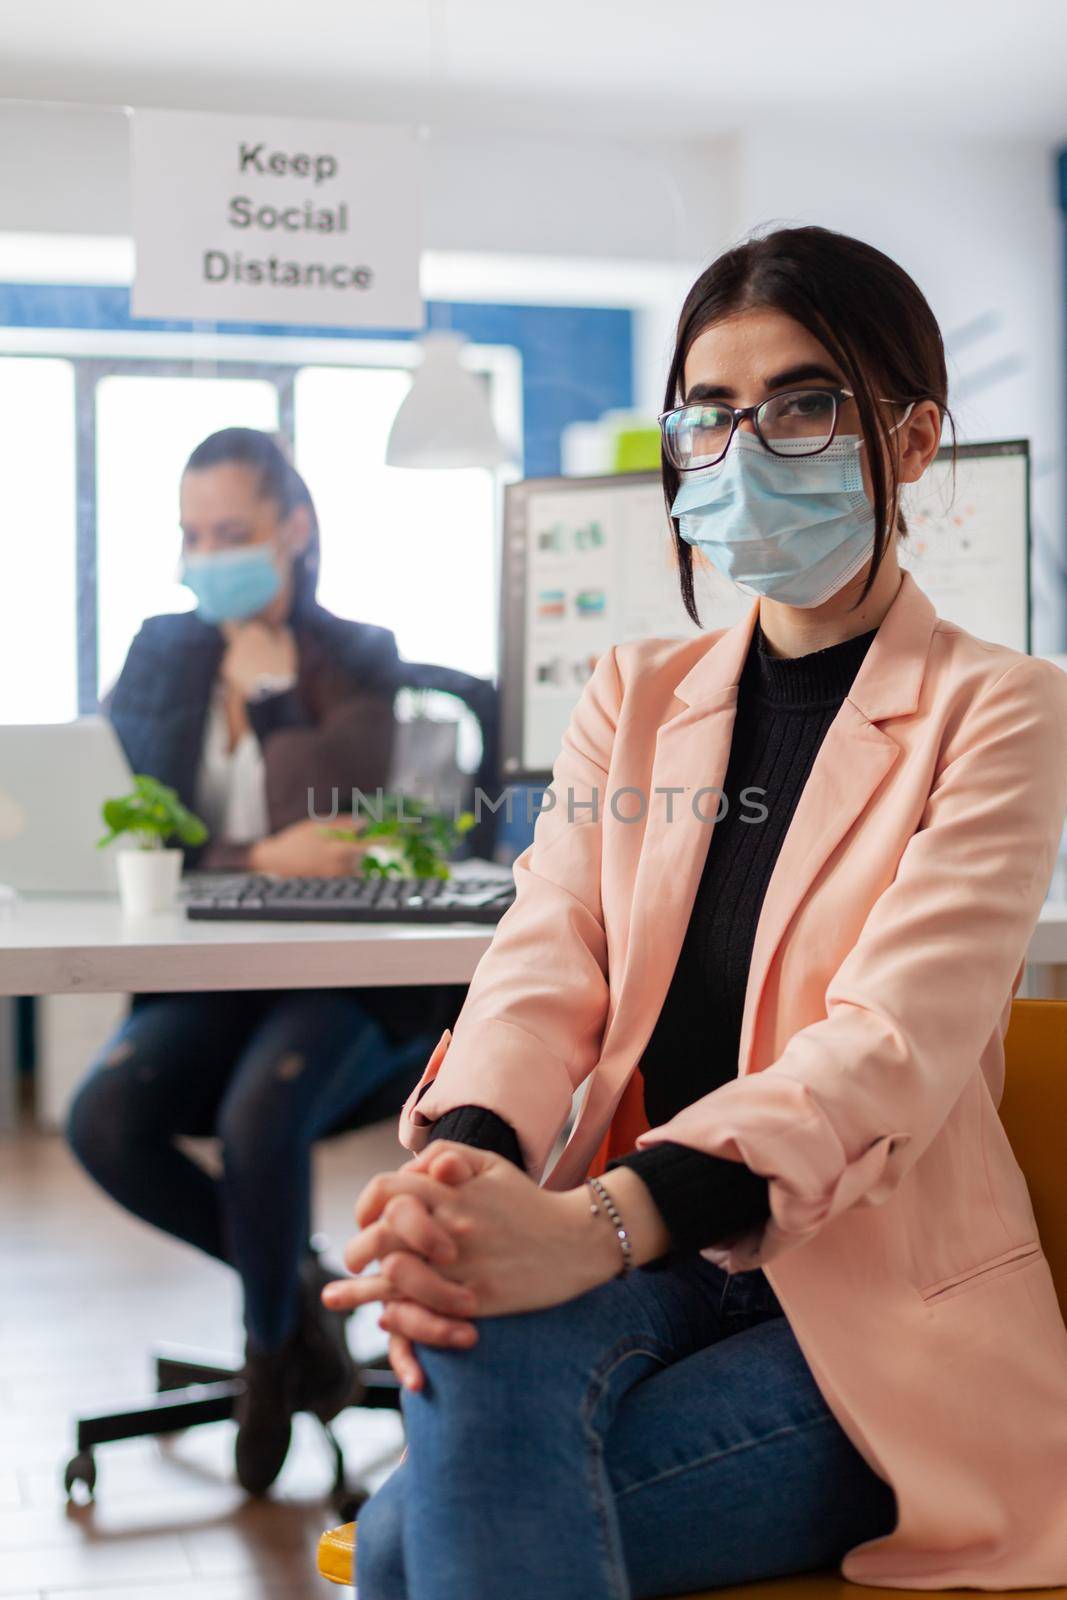 Portrait of manager entrepreneur with face mask as safety precation during coronavirus outbreak keeping social distancing from coworkers in office building looking at camera.